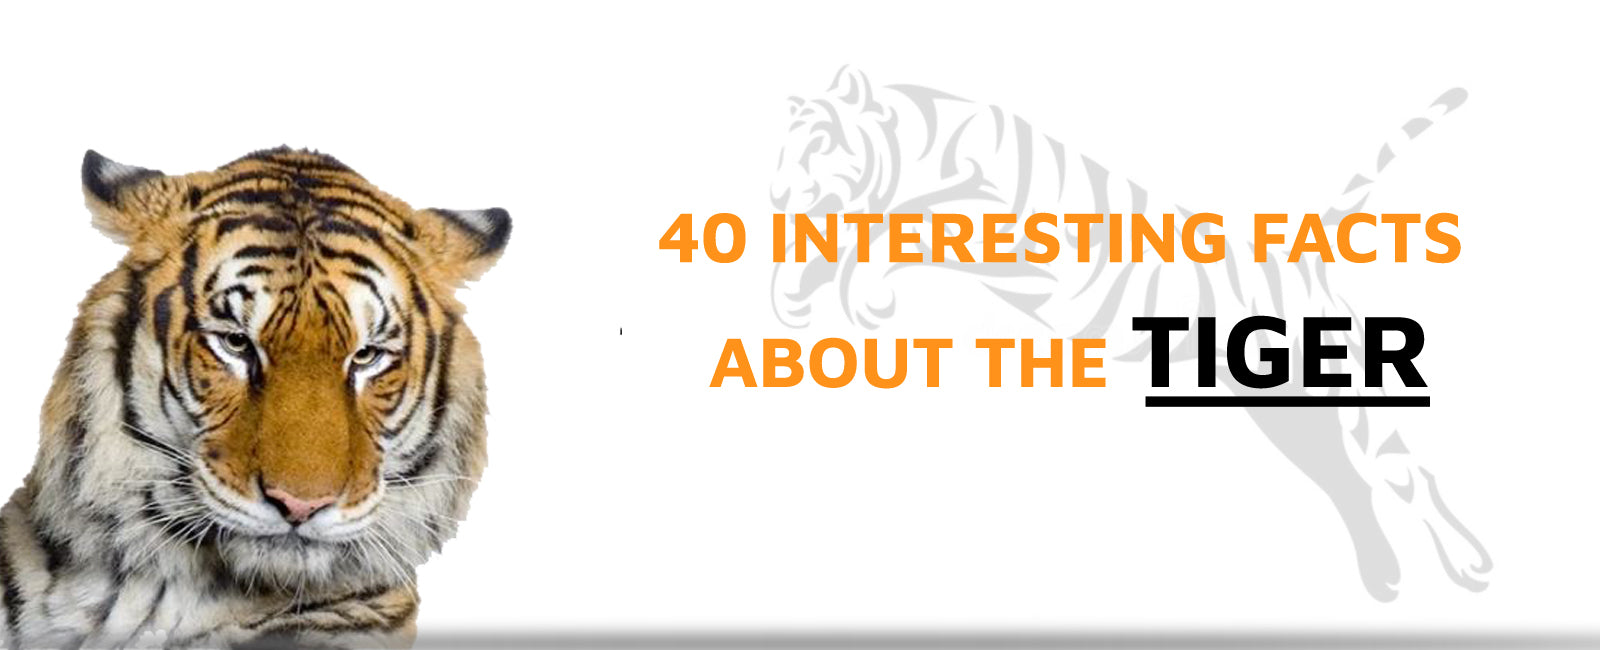 40 Interesting Facts about the Tiger